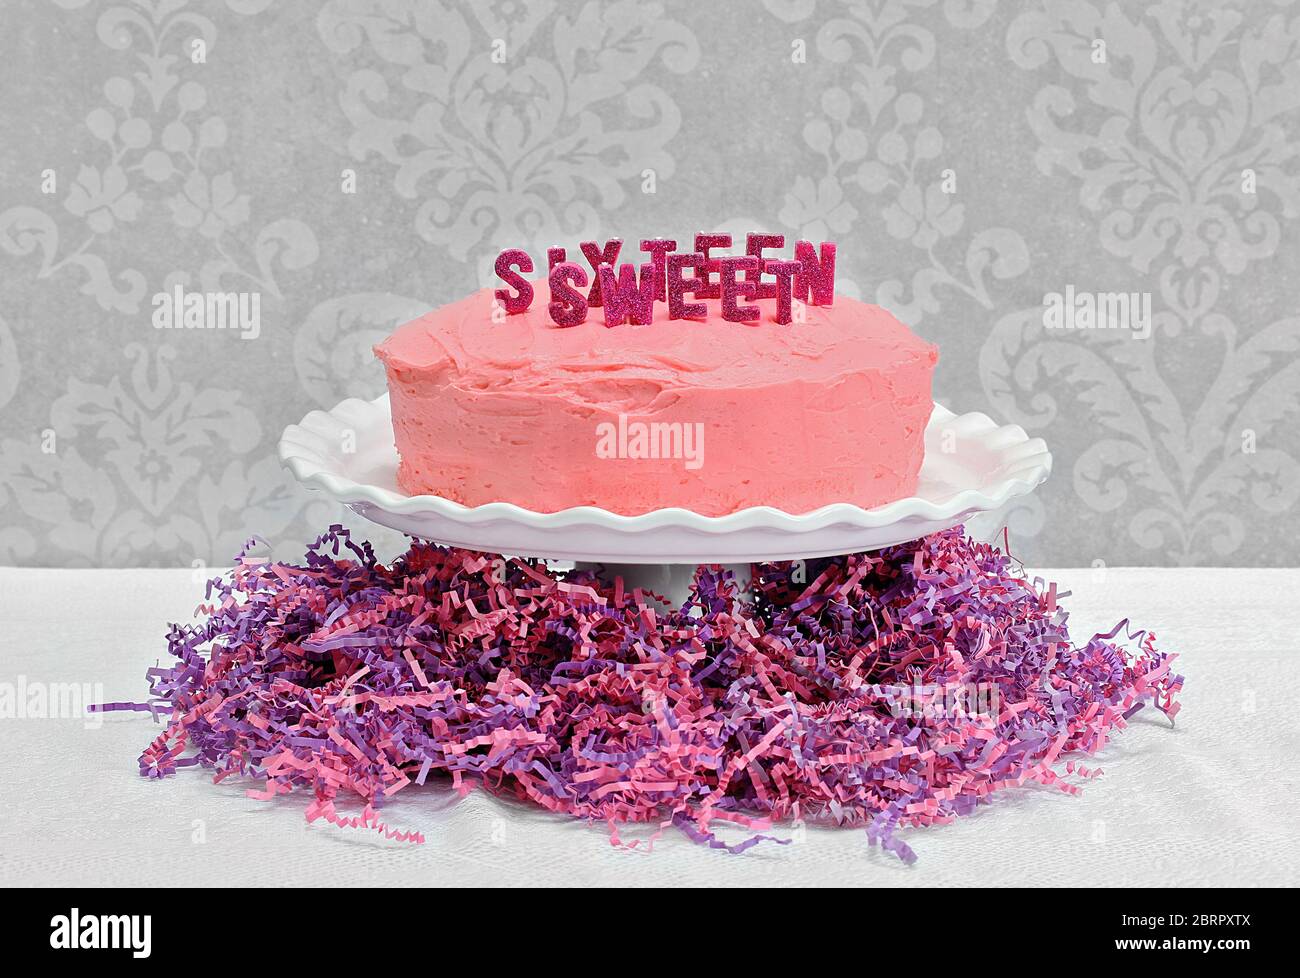 A pretty pink birthday layer cake with Sweet Sixteen spelled out on top in glitter candles.  Cake is on pedestal and surrounded by pink and purple cri Stock Photo